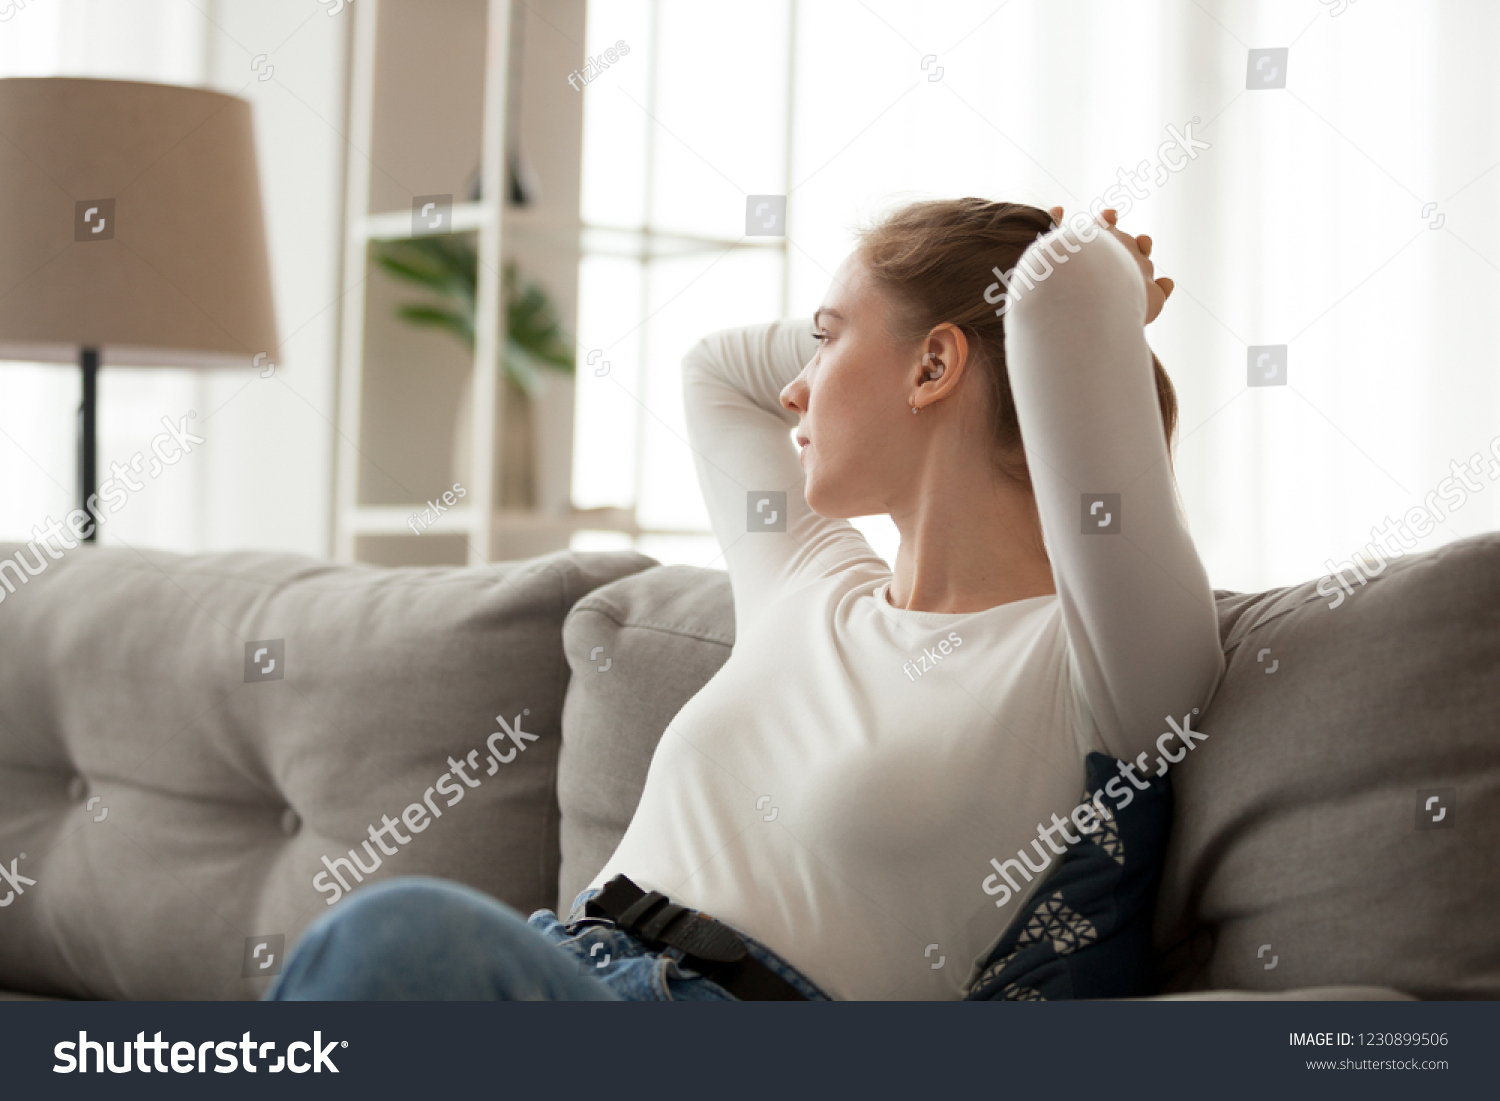 Thoughtful girl stretch sitting on cozy couch looking in distance considering, dreamy female relax at home thinking of future or making plans, distracted young woman rest on sofa lost in thoughts #1230899506